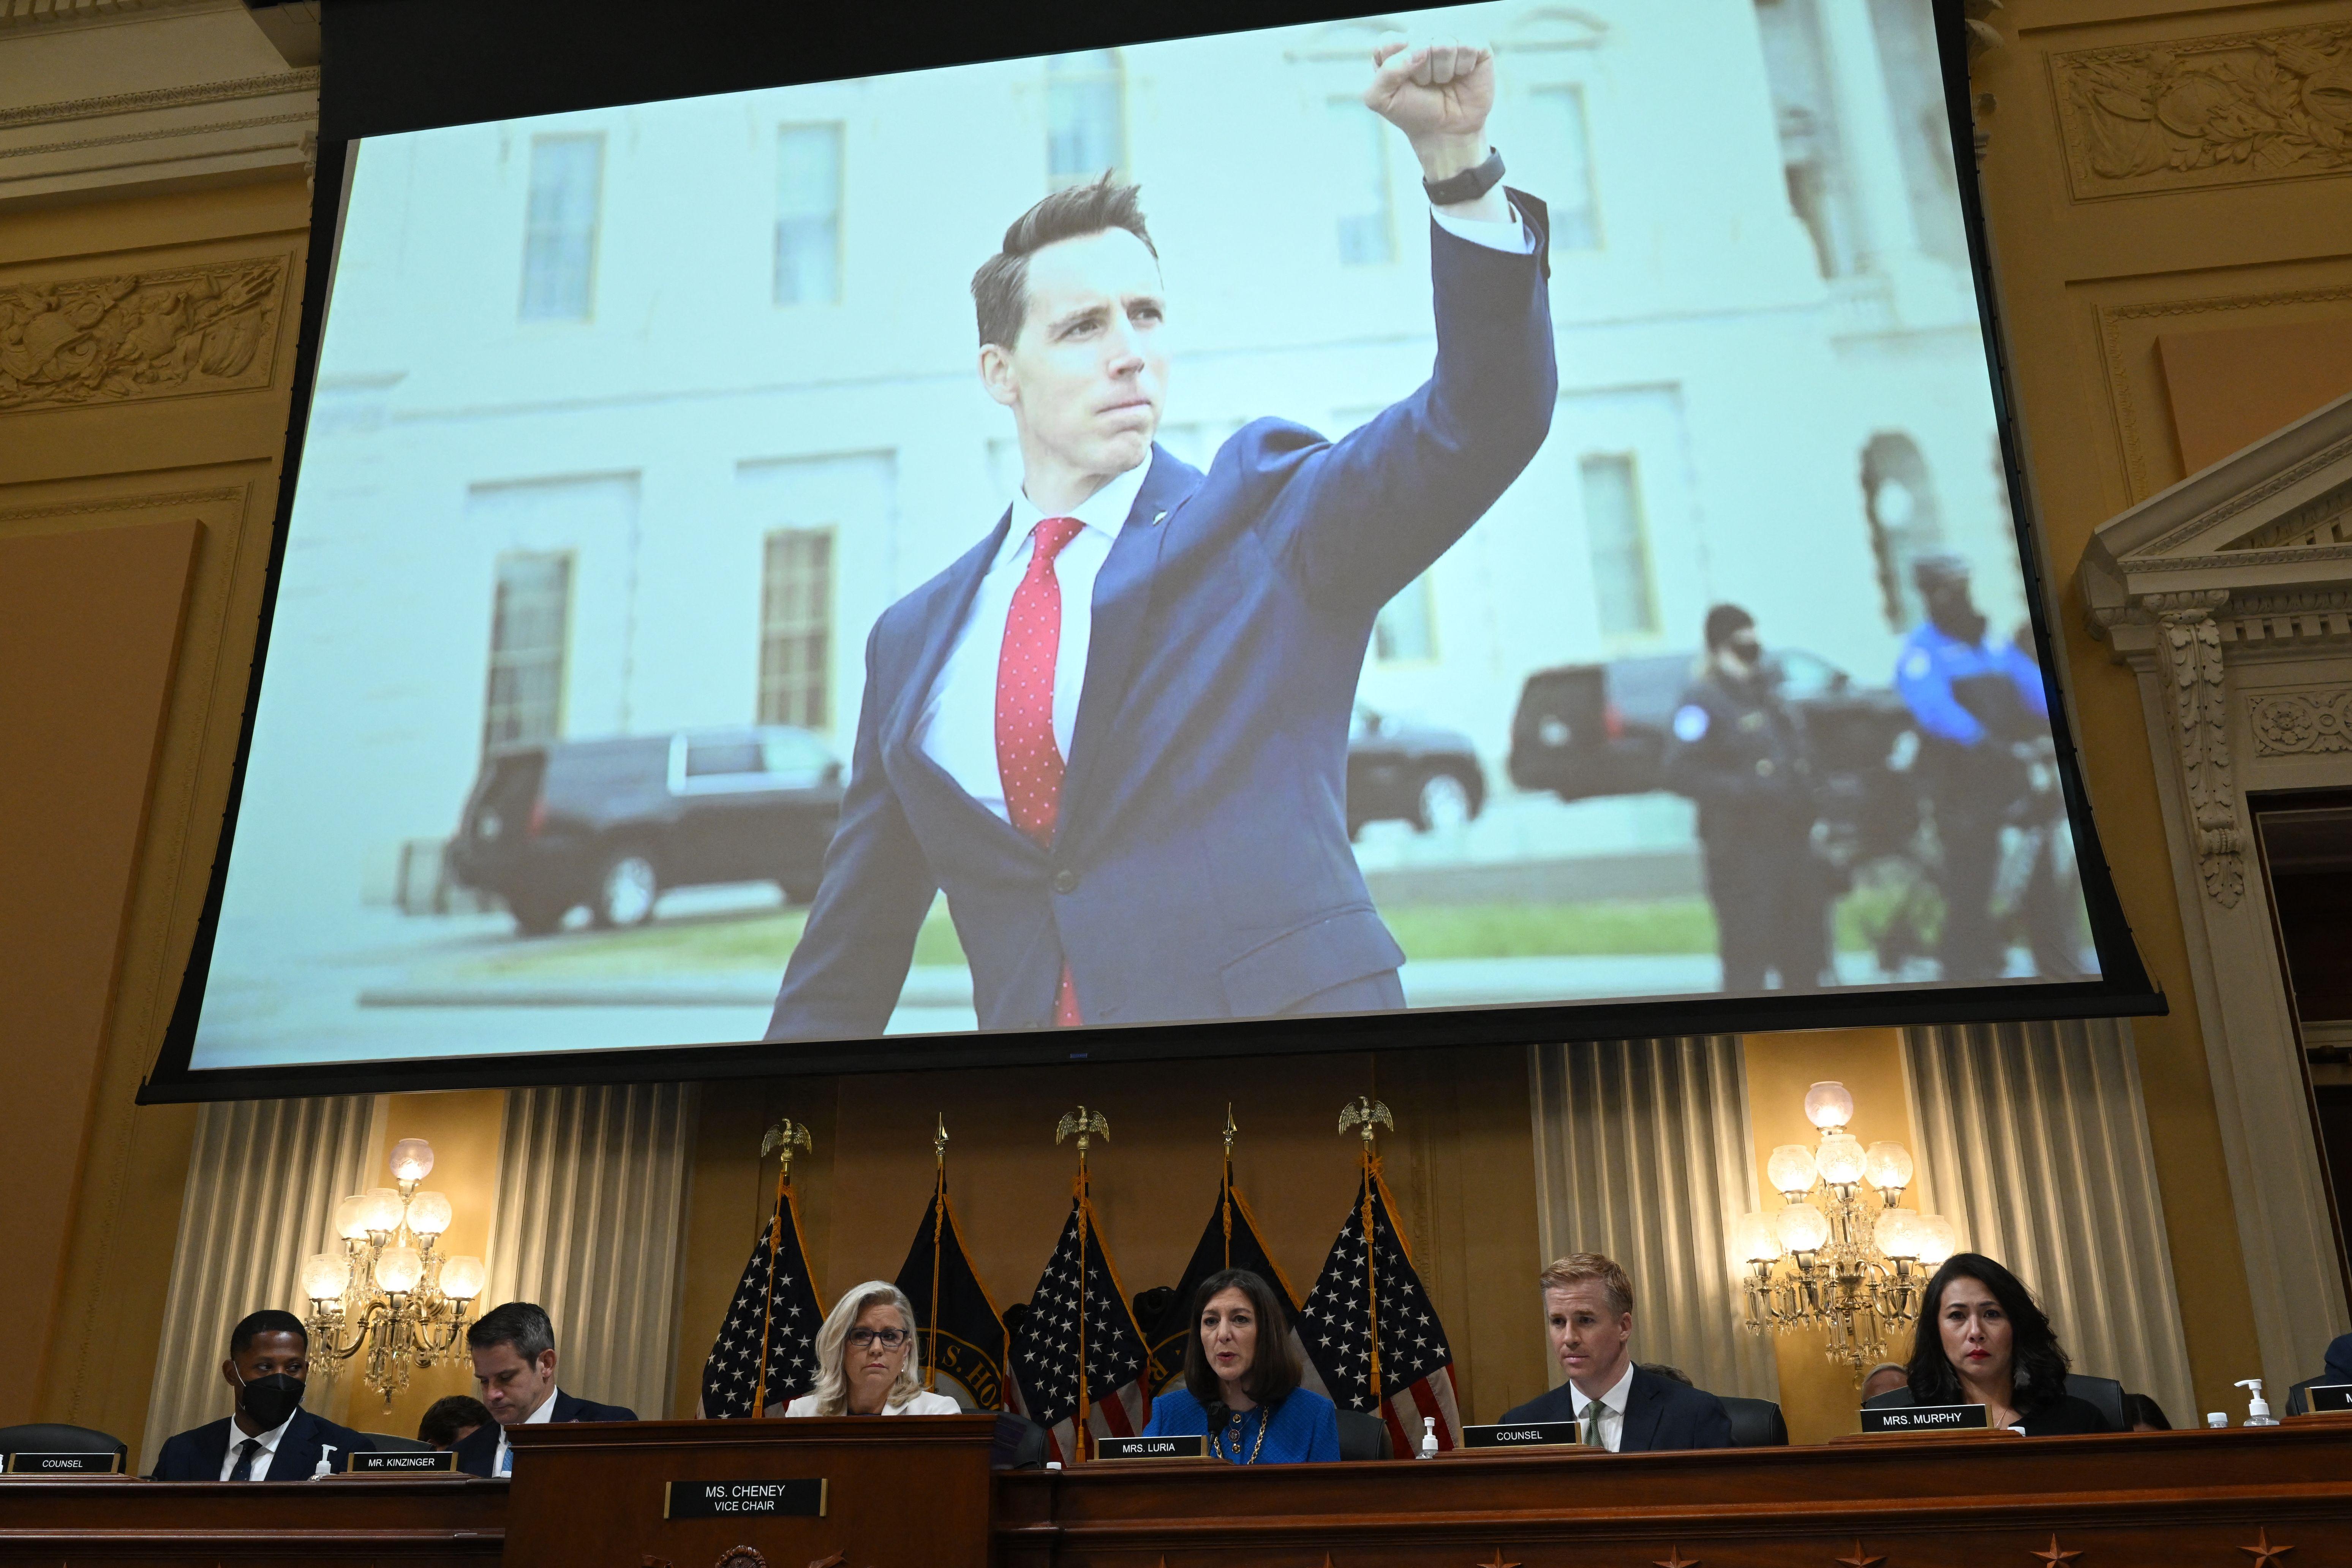 Hawley raising his fist in a blue suit and red tie is projected to a hearing room.